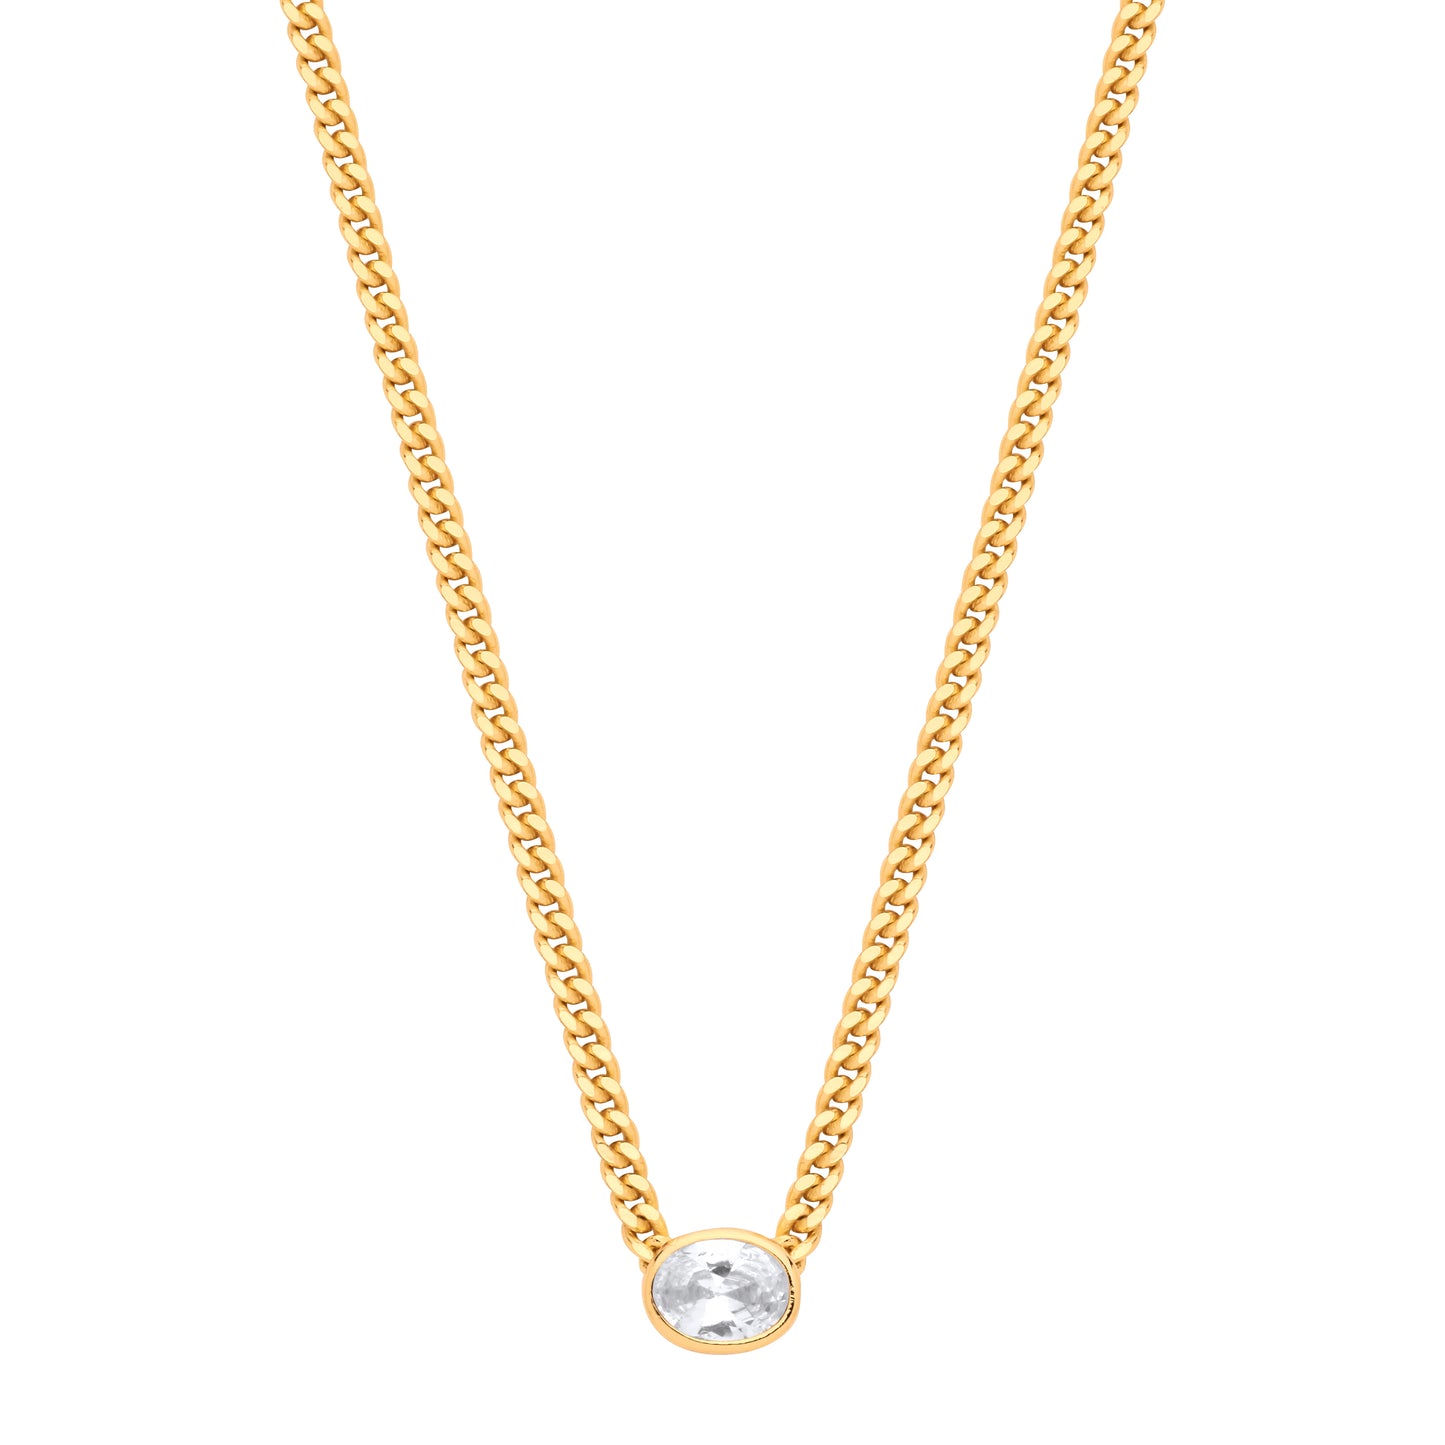 Gold-Silver Collerate Necklace Oval Necklace - GVK496G